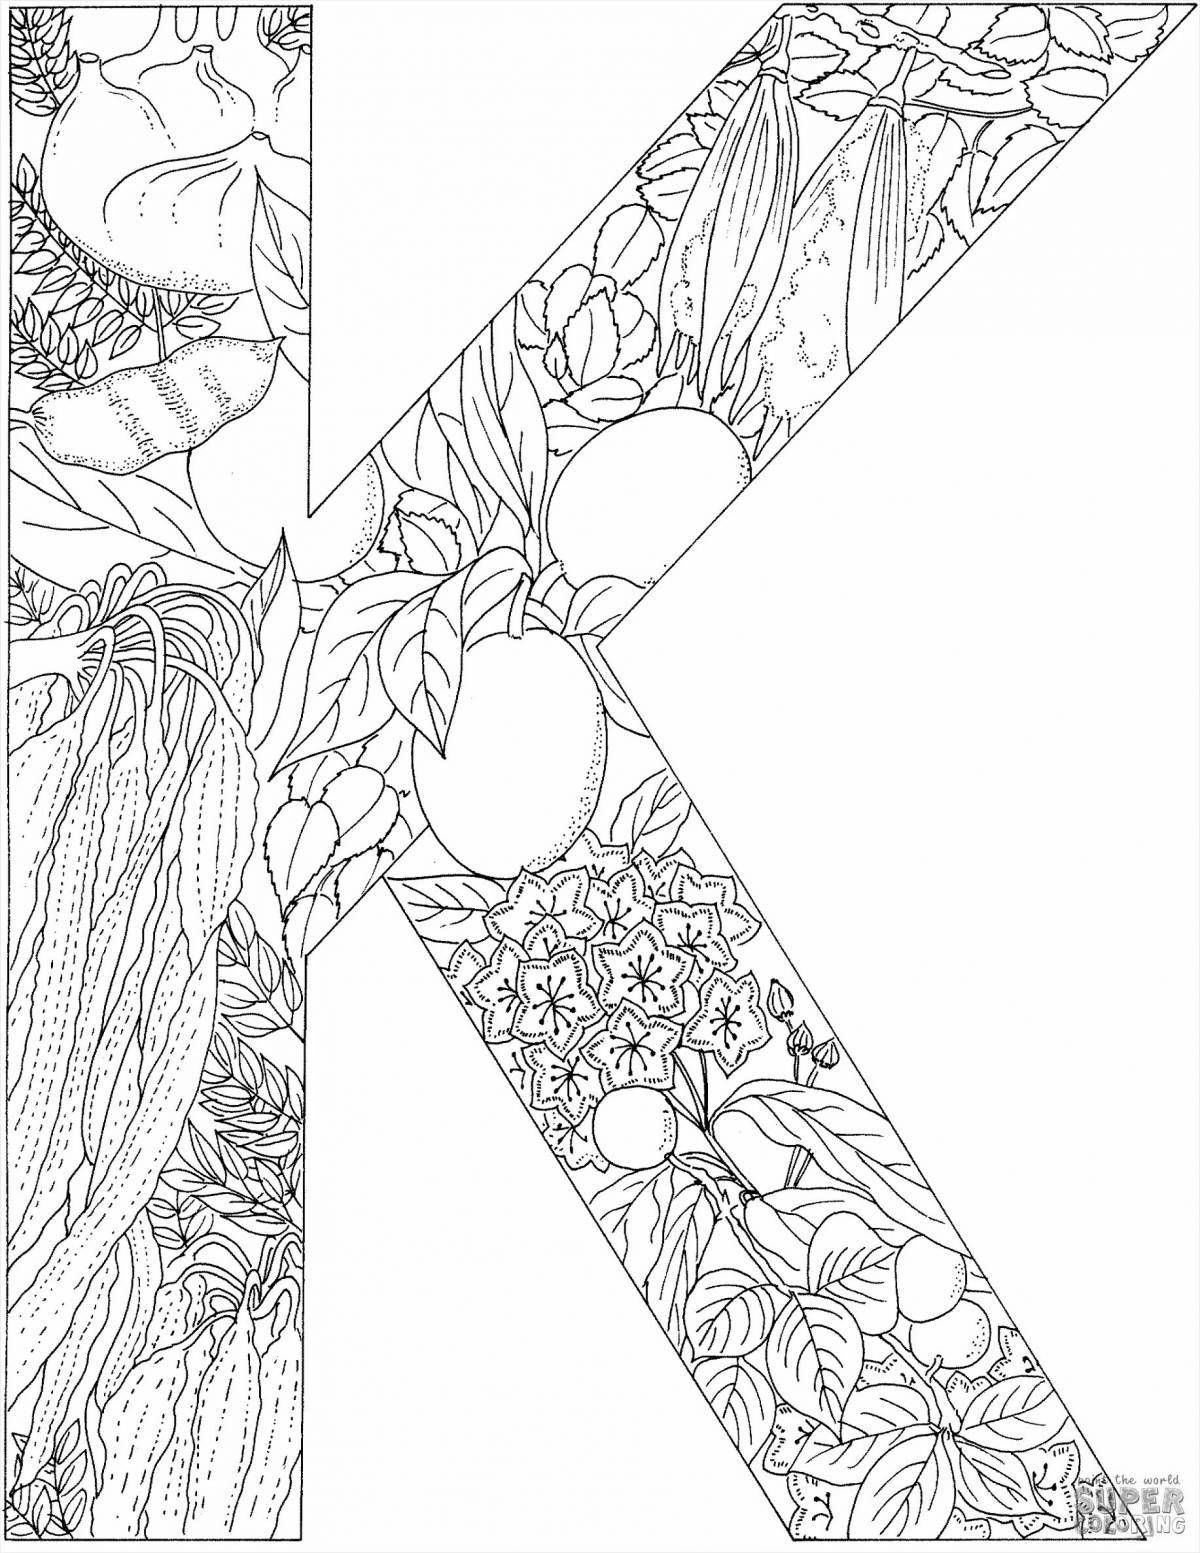 Coloring book attractive anti-stress letters